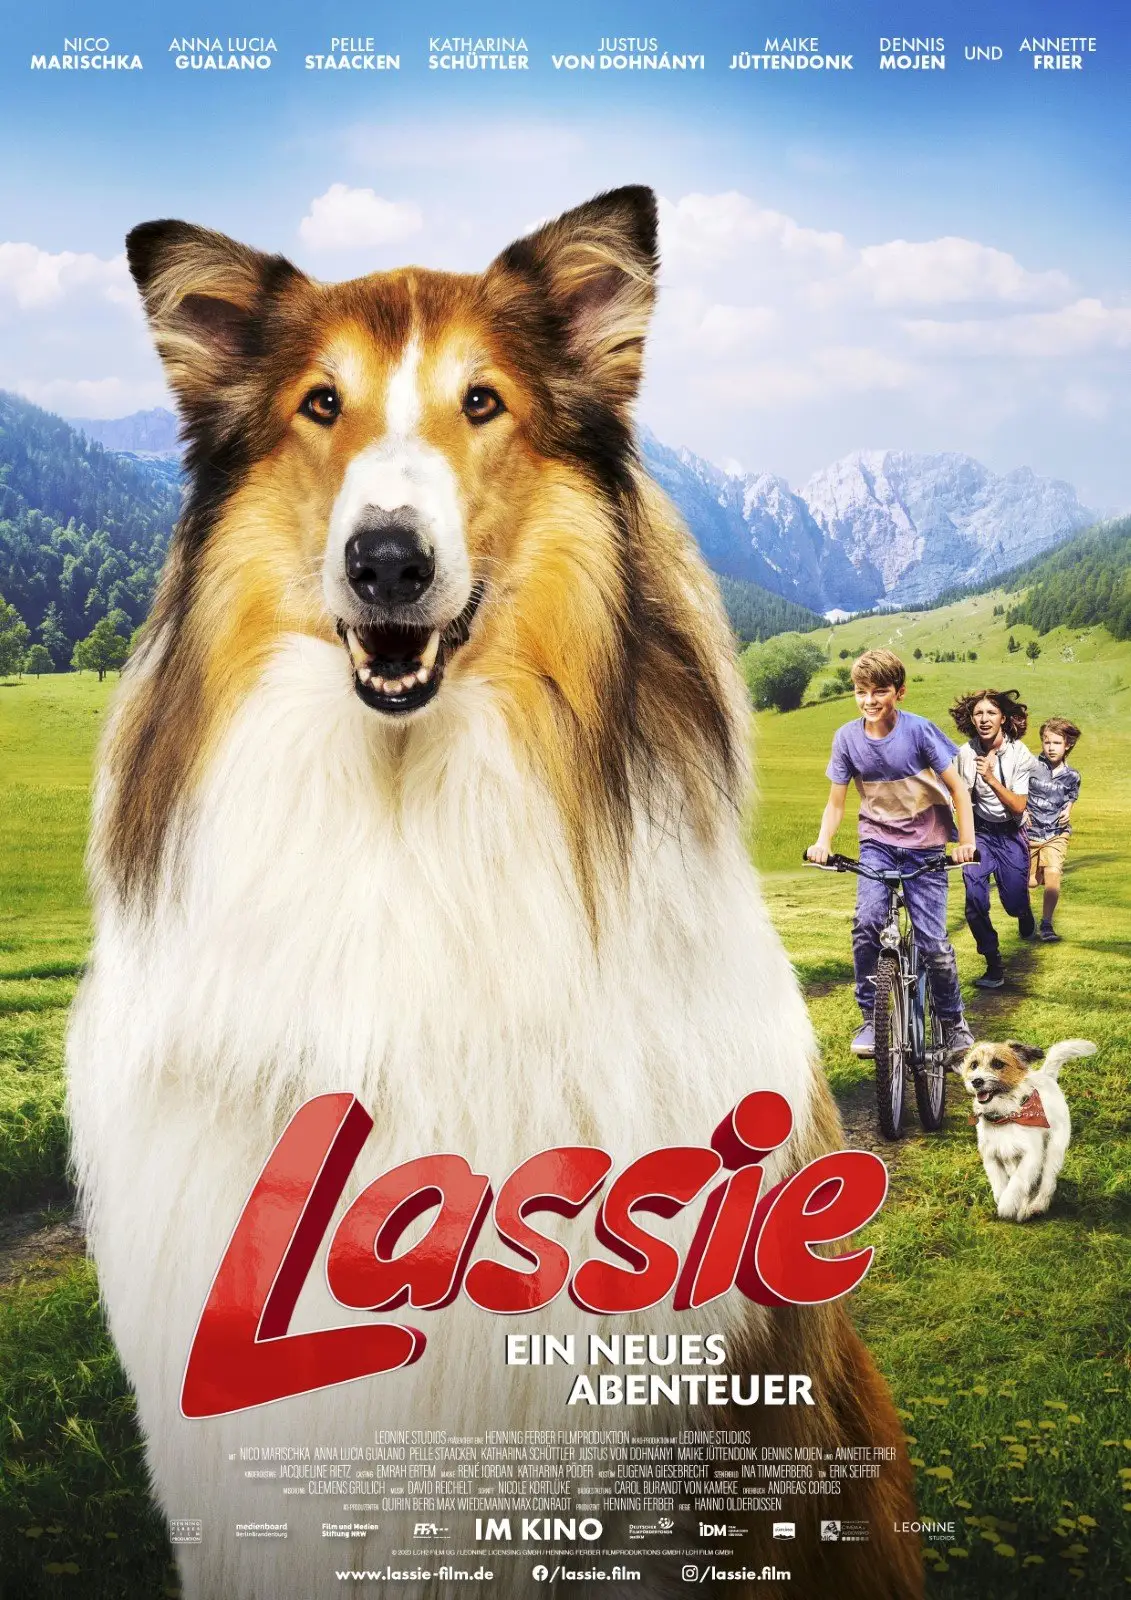 The Iconic Tale of The Dog Lassie A Story of Loyalty and Adventure